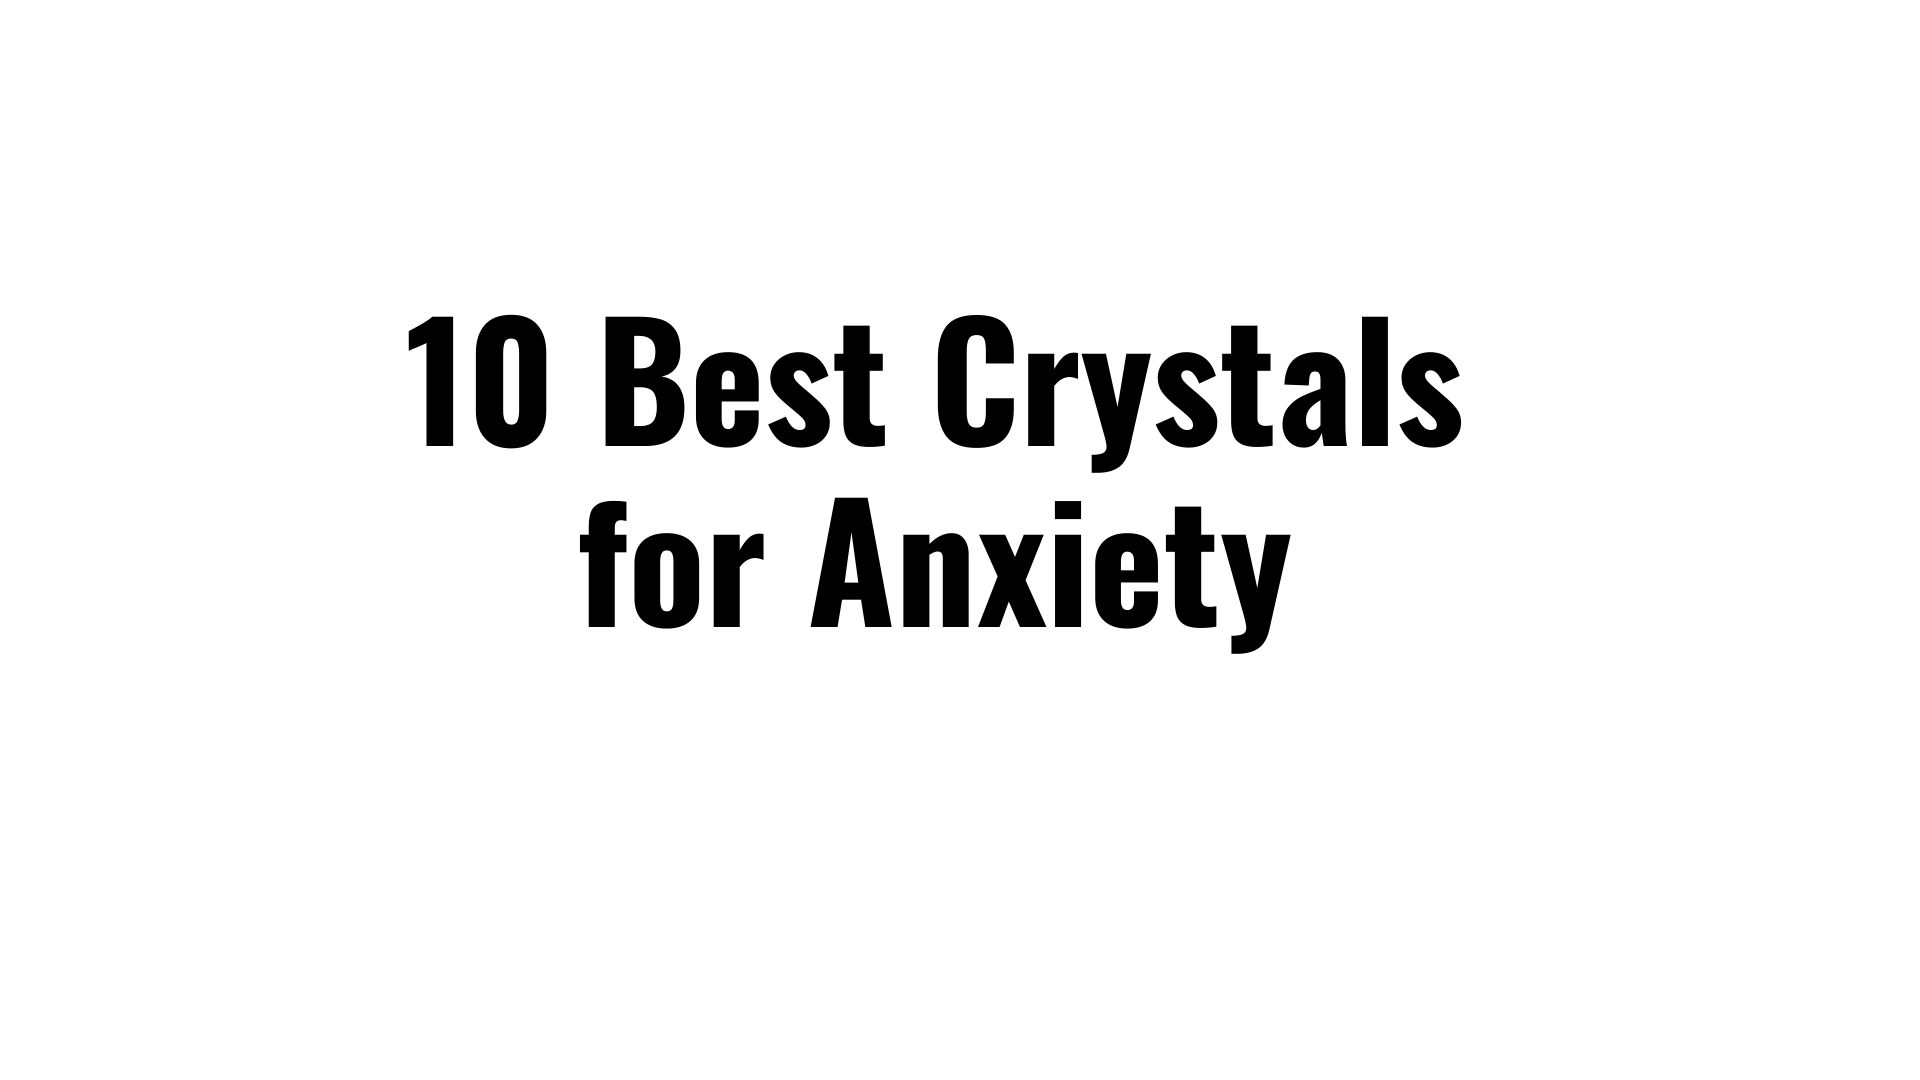 10 Best Crystals for Anxiety